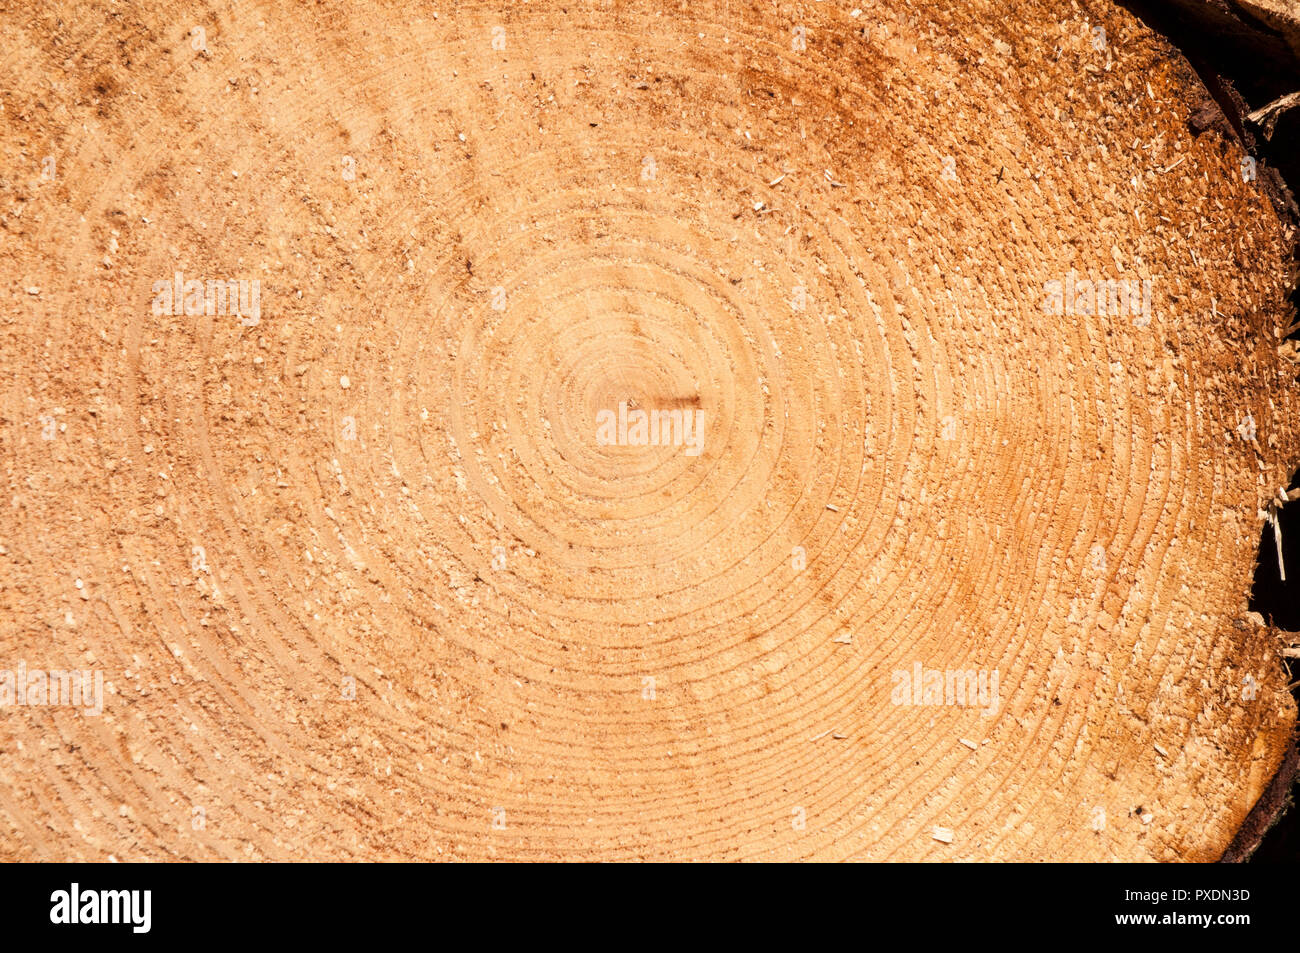 Secret clocks in tree-rings may help date ancient events - Daily Excelsior